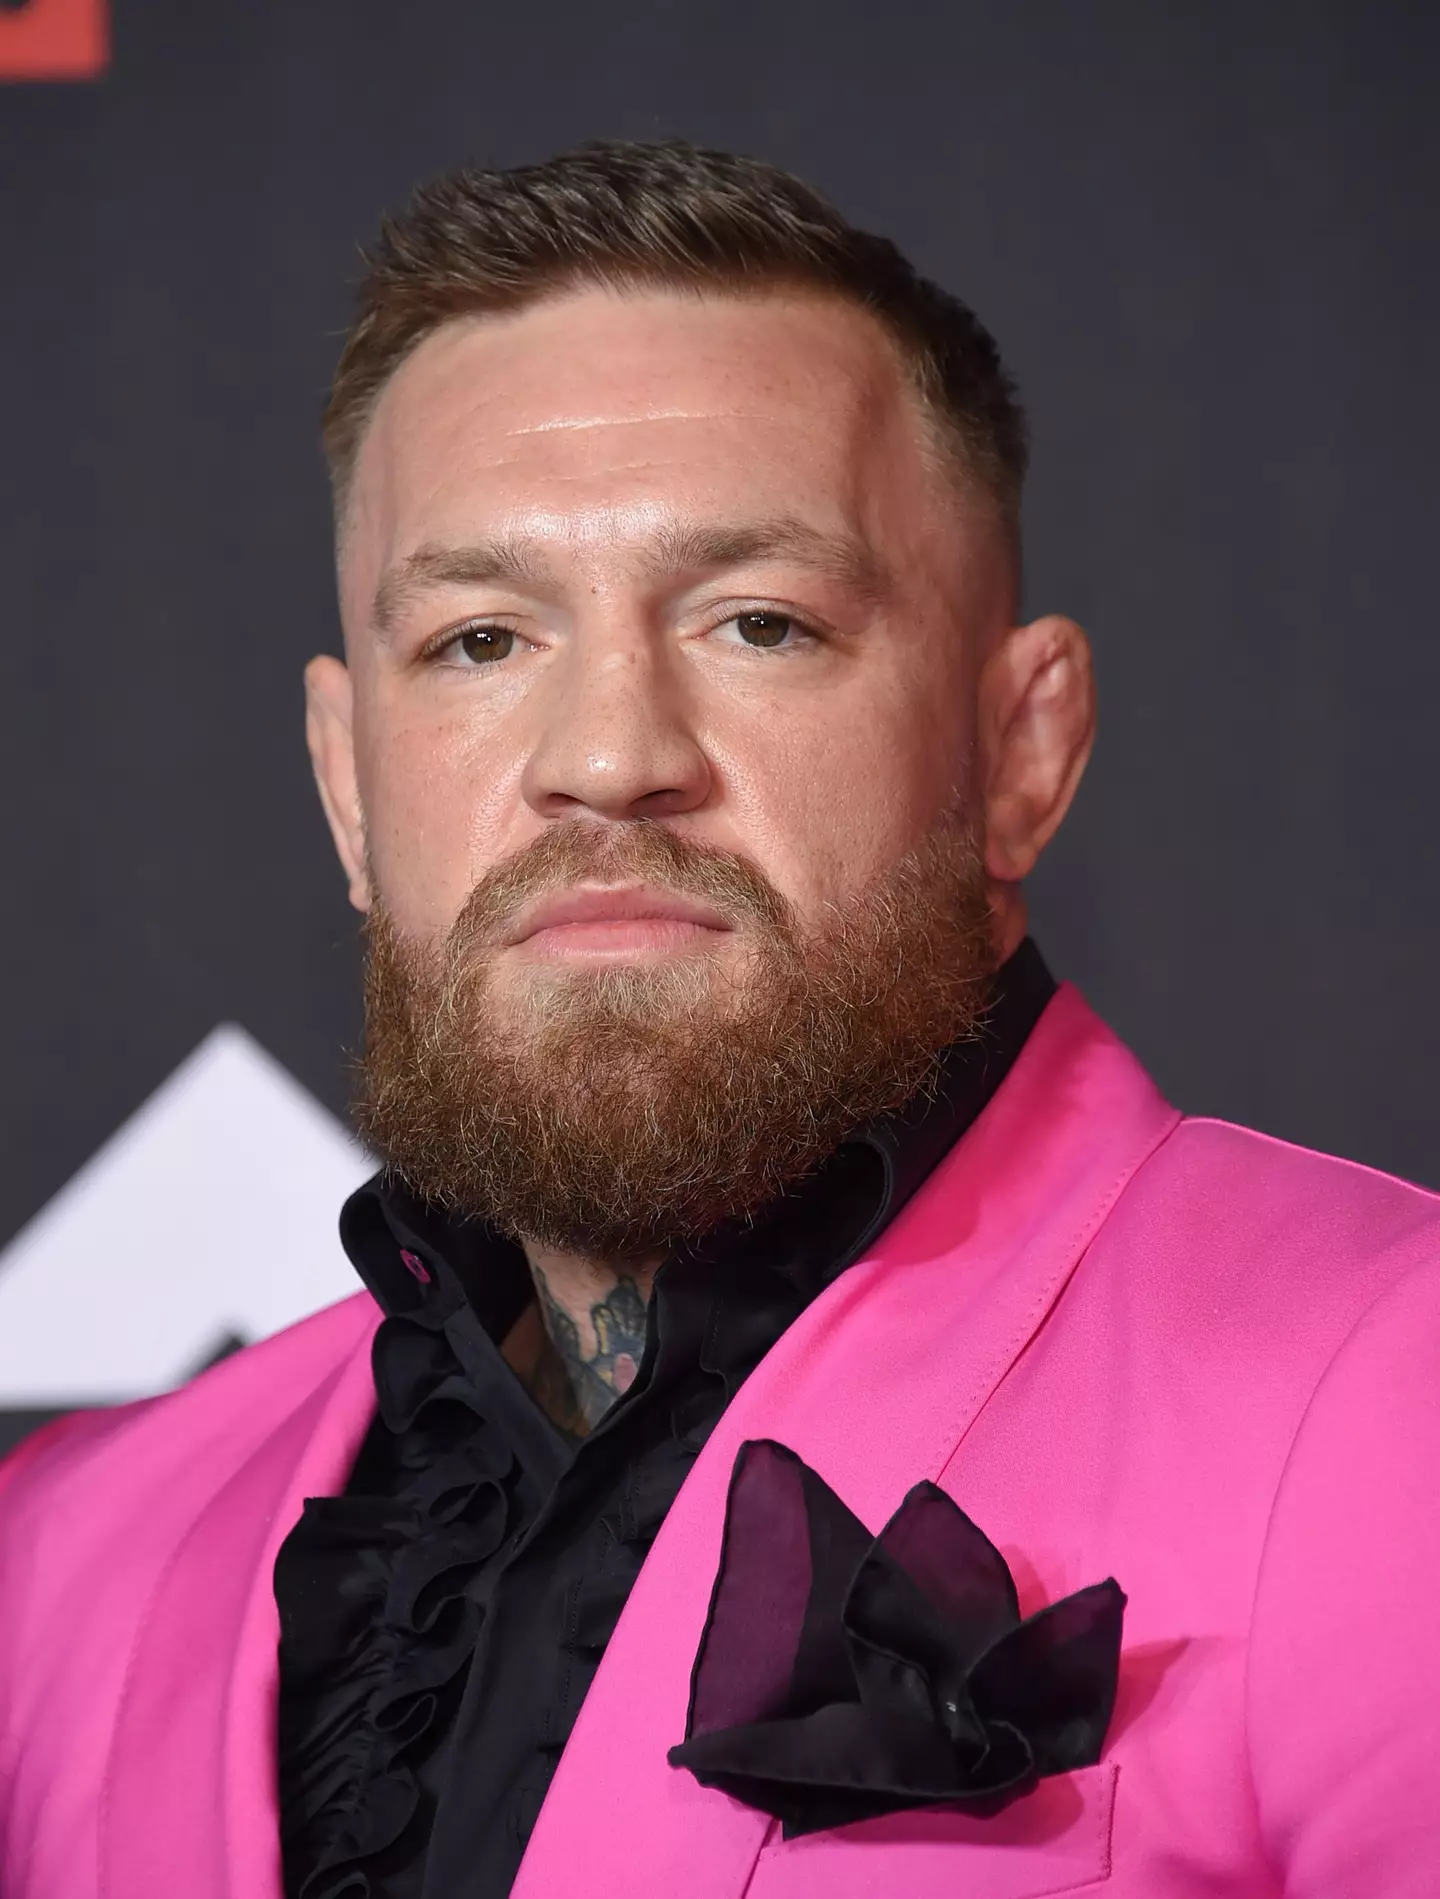 Conor McGregor has revealed his current net worth.